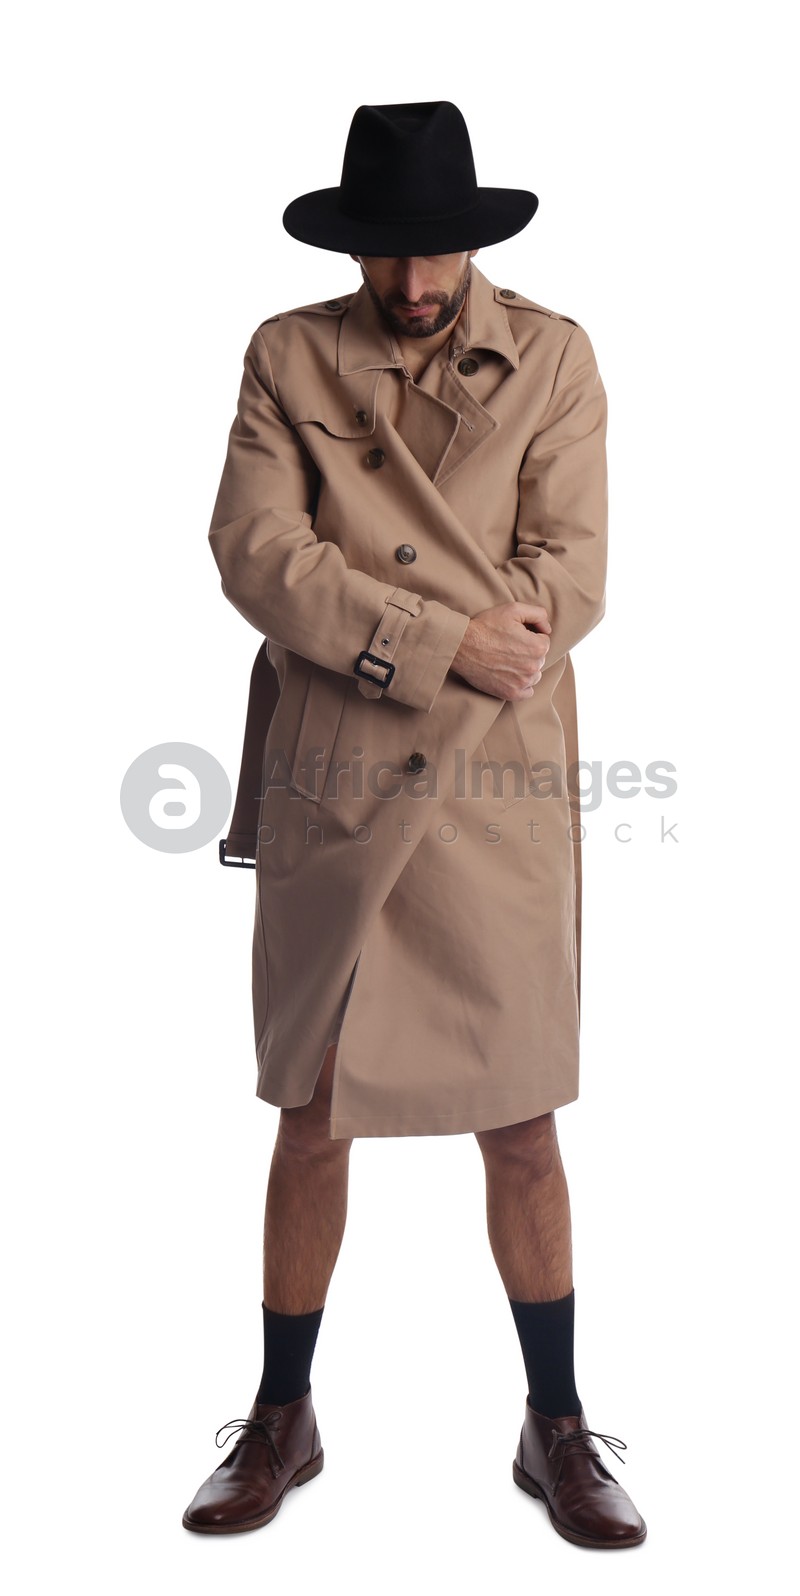 Exhibitionist in coat and hat isolated on white